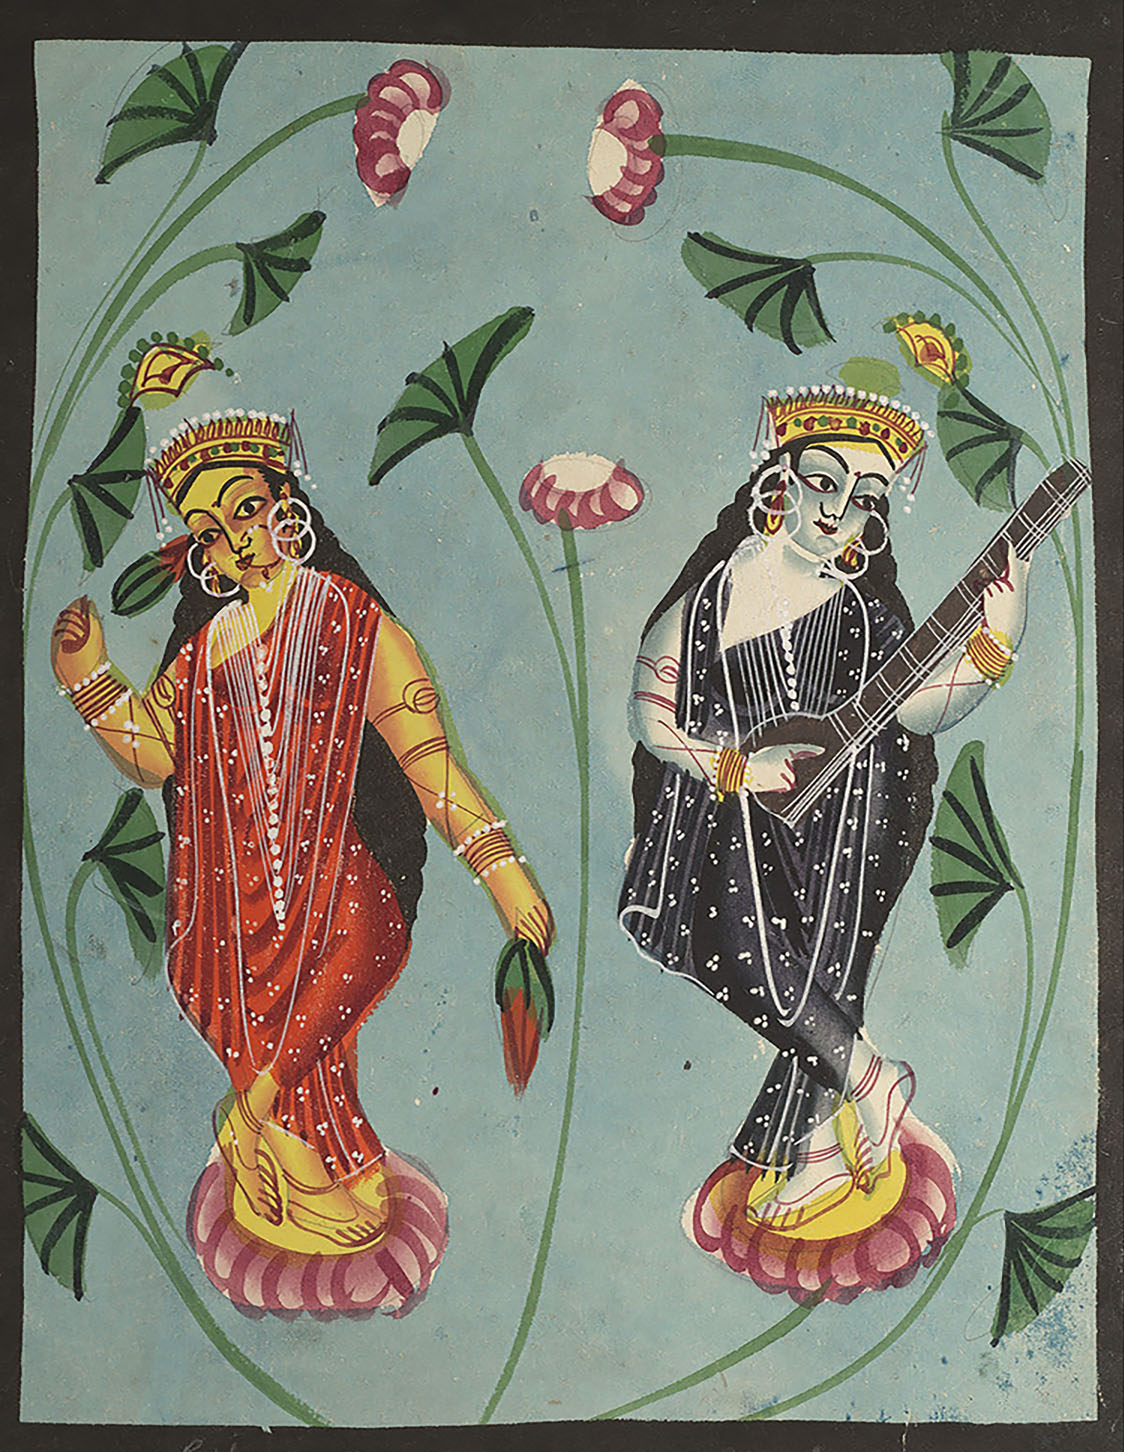 Painting of the goddesses Lakshmi and Sarasvati, each standing upright over a lotus, surrounded by lotus leaves and flowers.